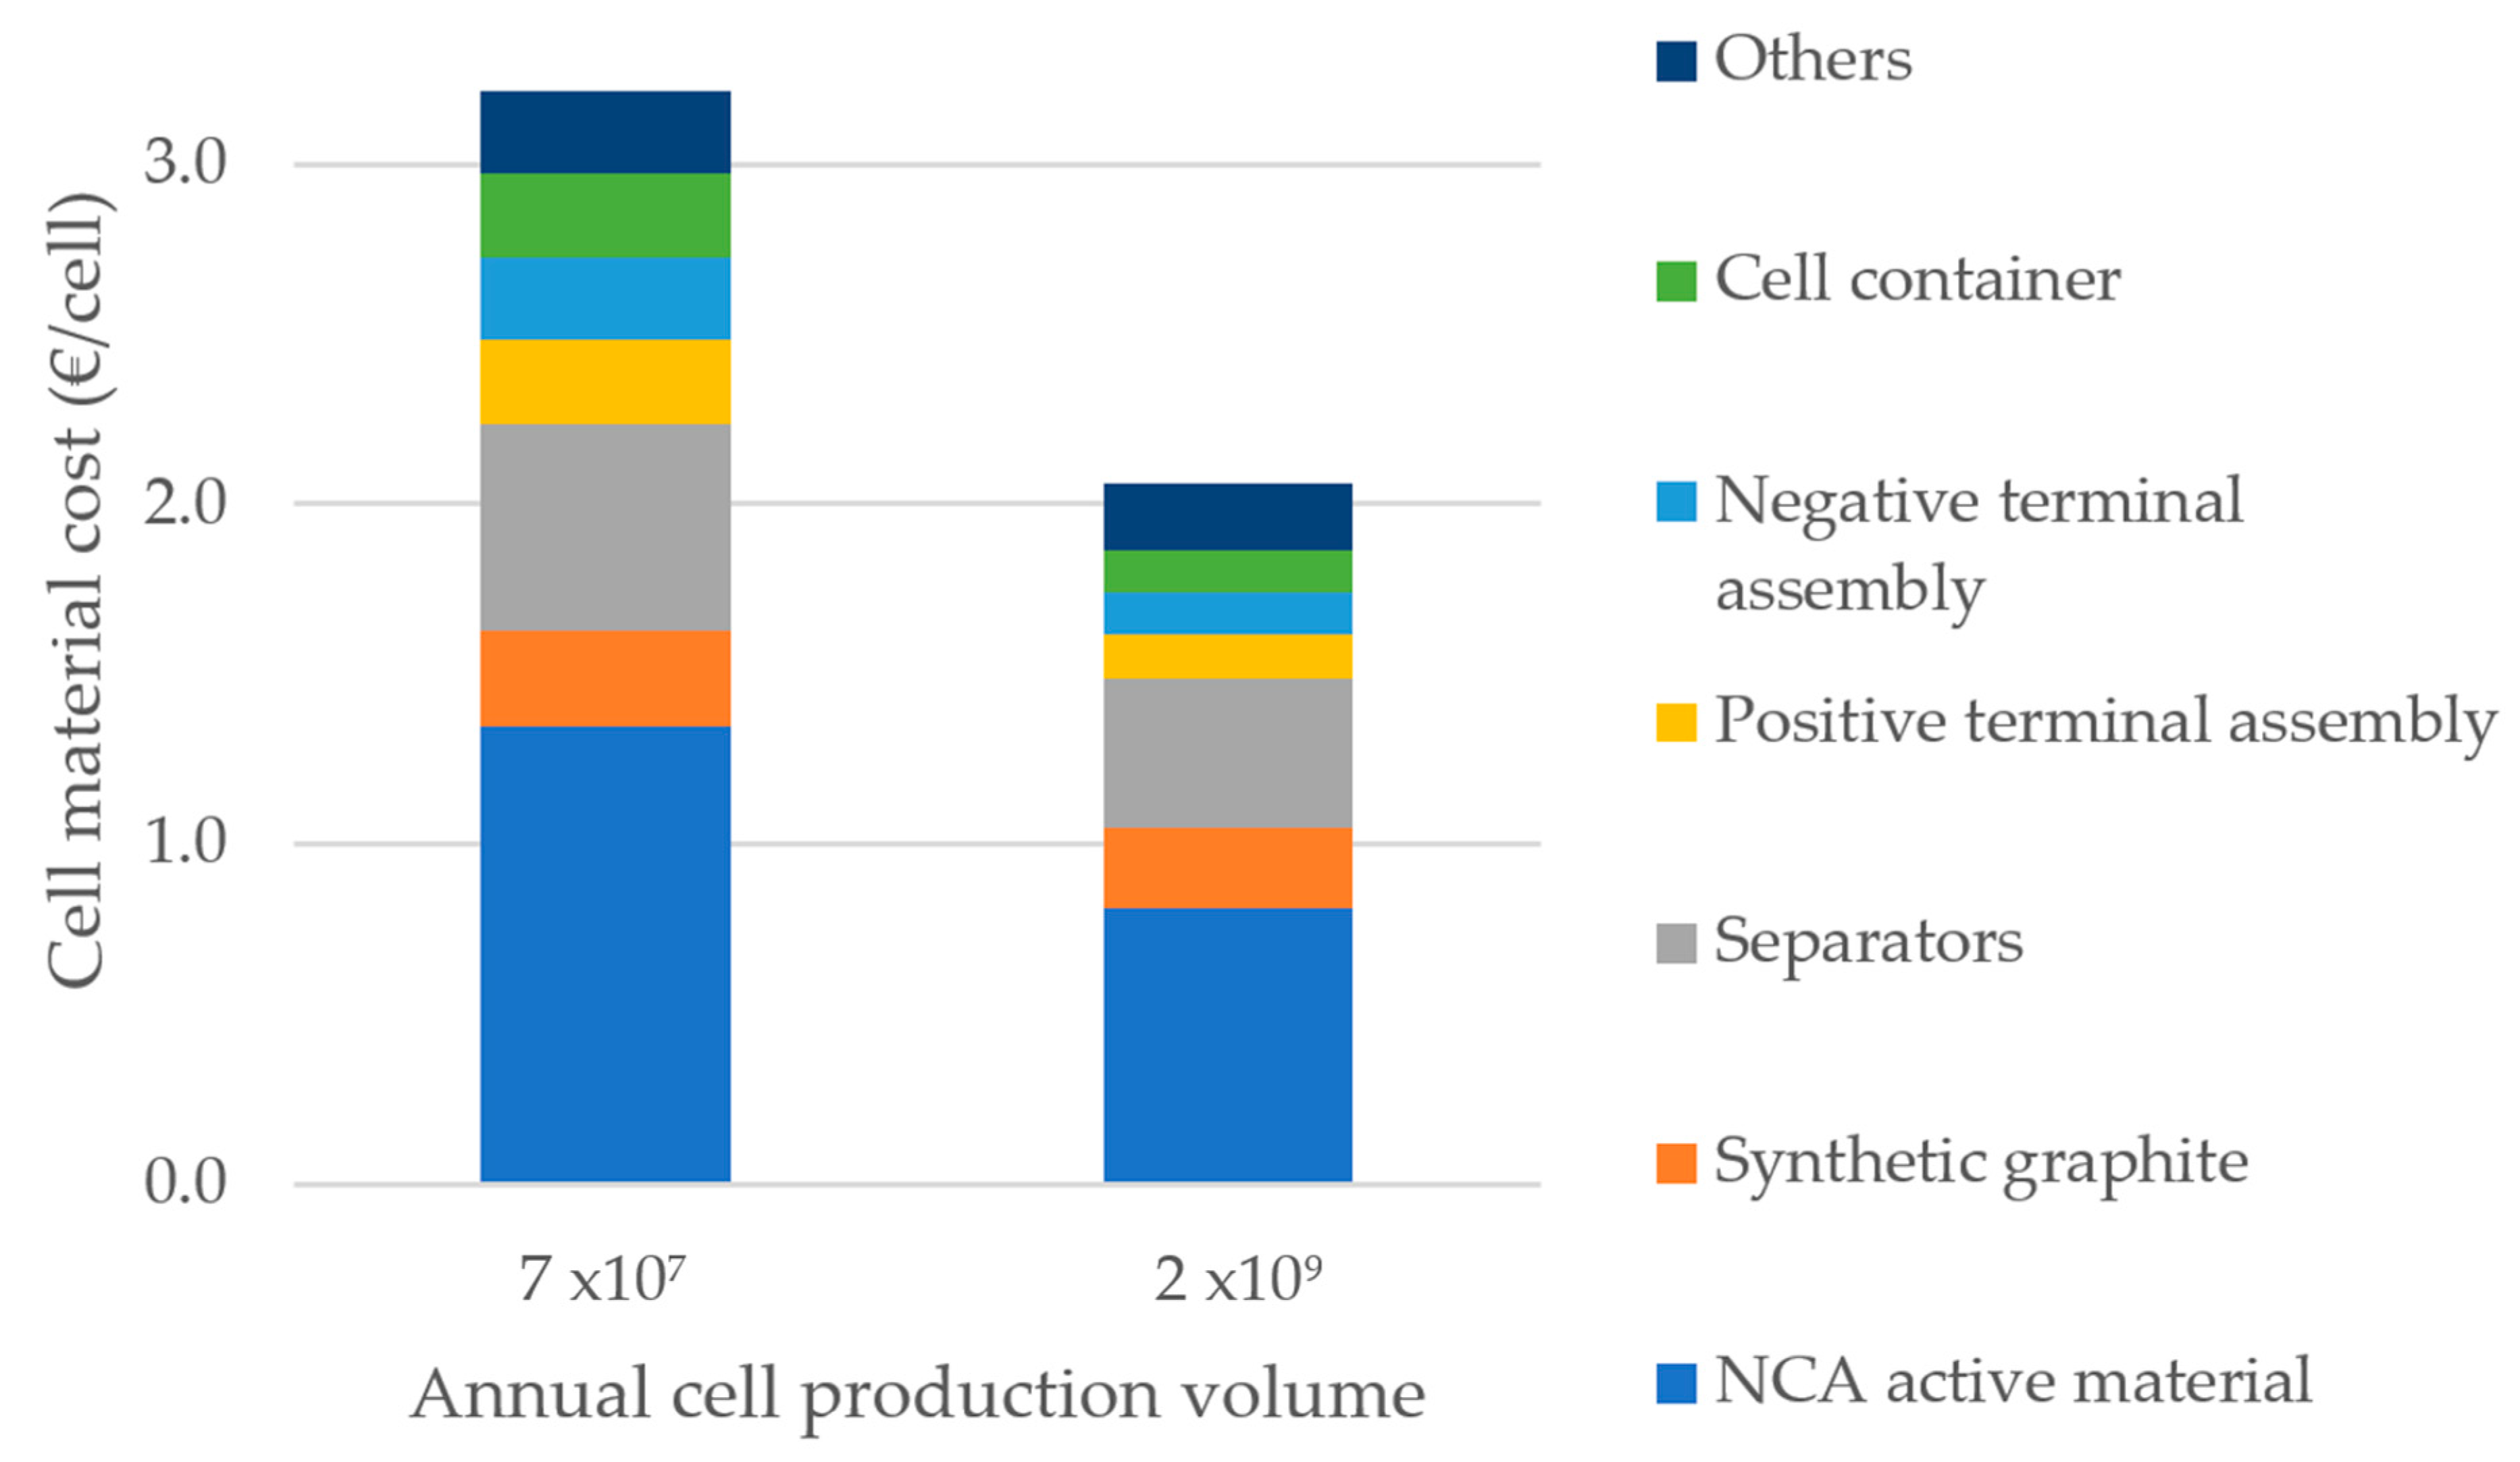 Batteries | Free Full-Text | Eco-Efficiency of a Lithium-Ion Battery for  Electric Vehicles: Influence of Manufacturing Country and Commodity Prices  on GHG Emissions and Costs